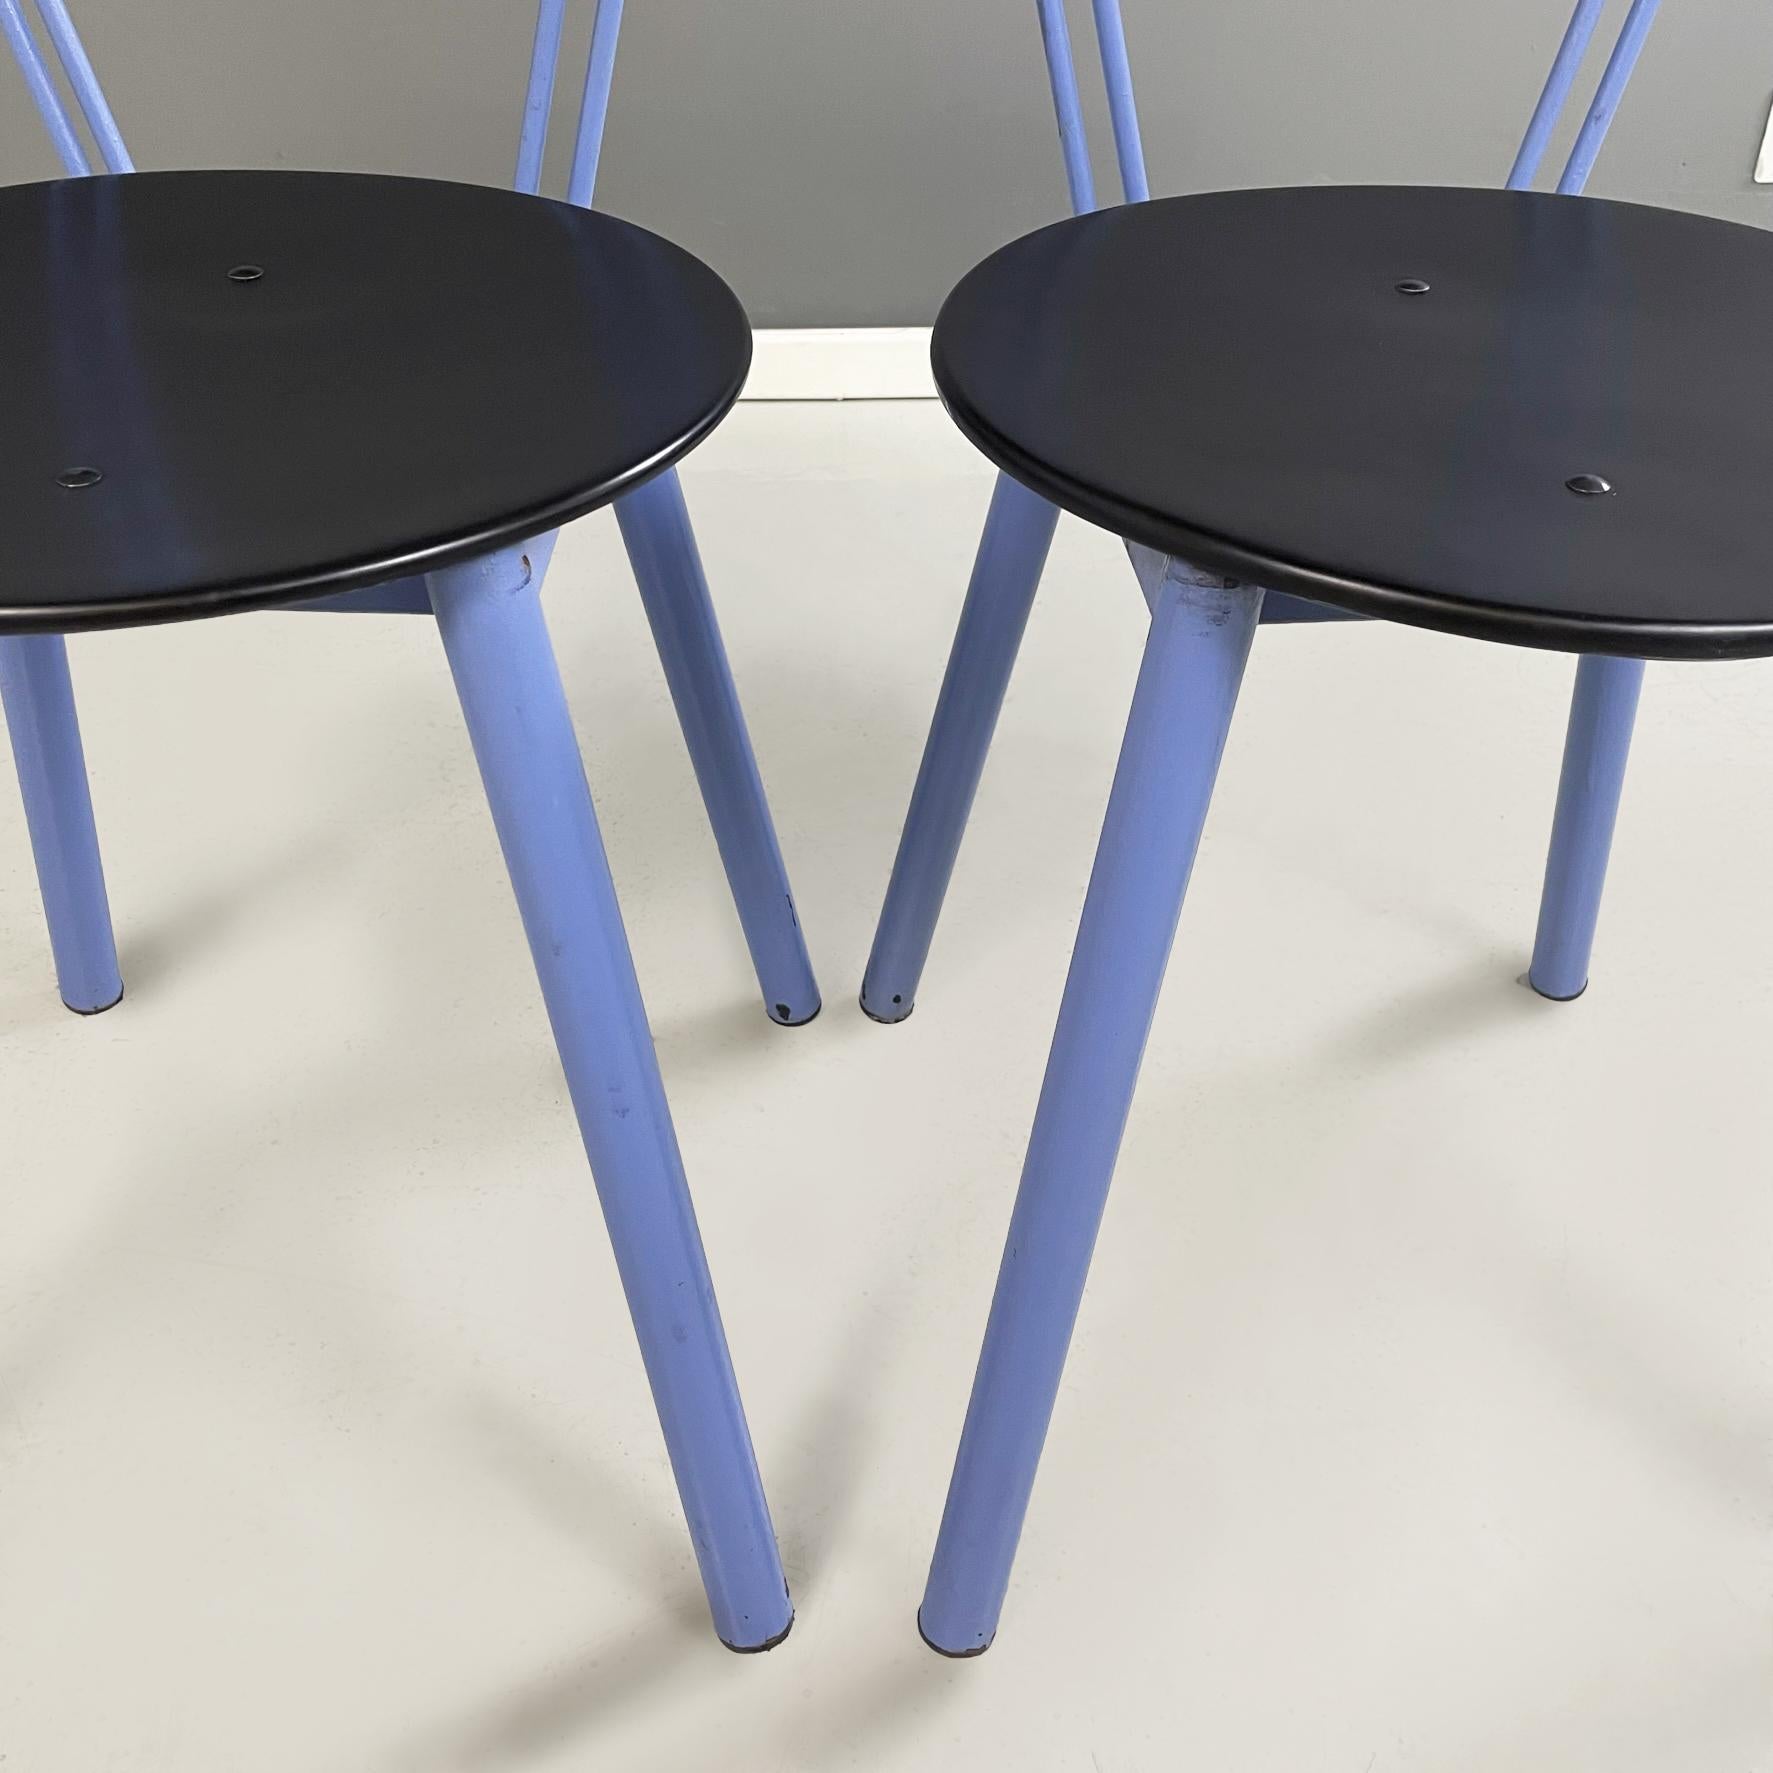 Italian modern Chairs in blue metal, black wood and black rubber, 1980s For Sale 2